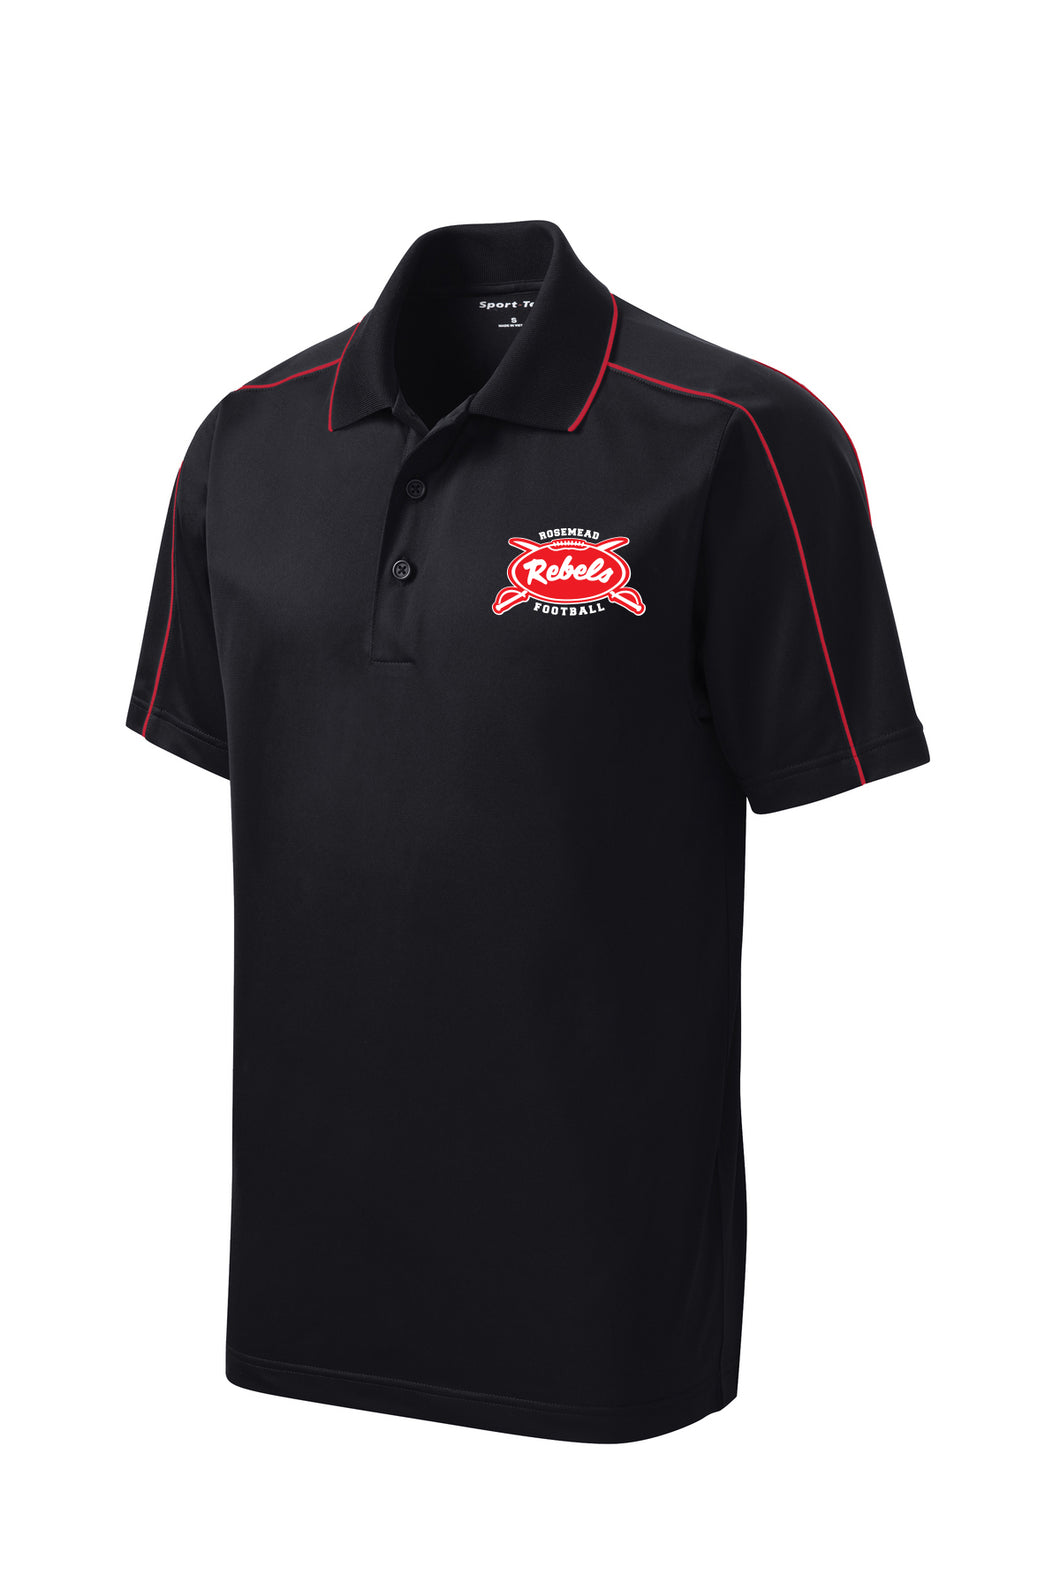 REBEL POLO 2023 - BLACK WITH RED TRIM - USA SIZES